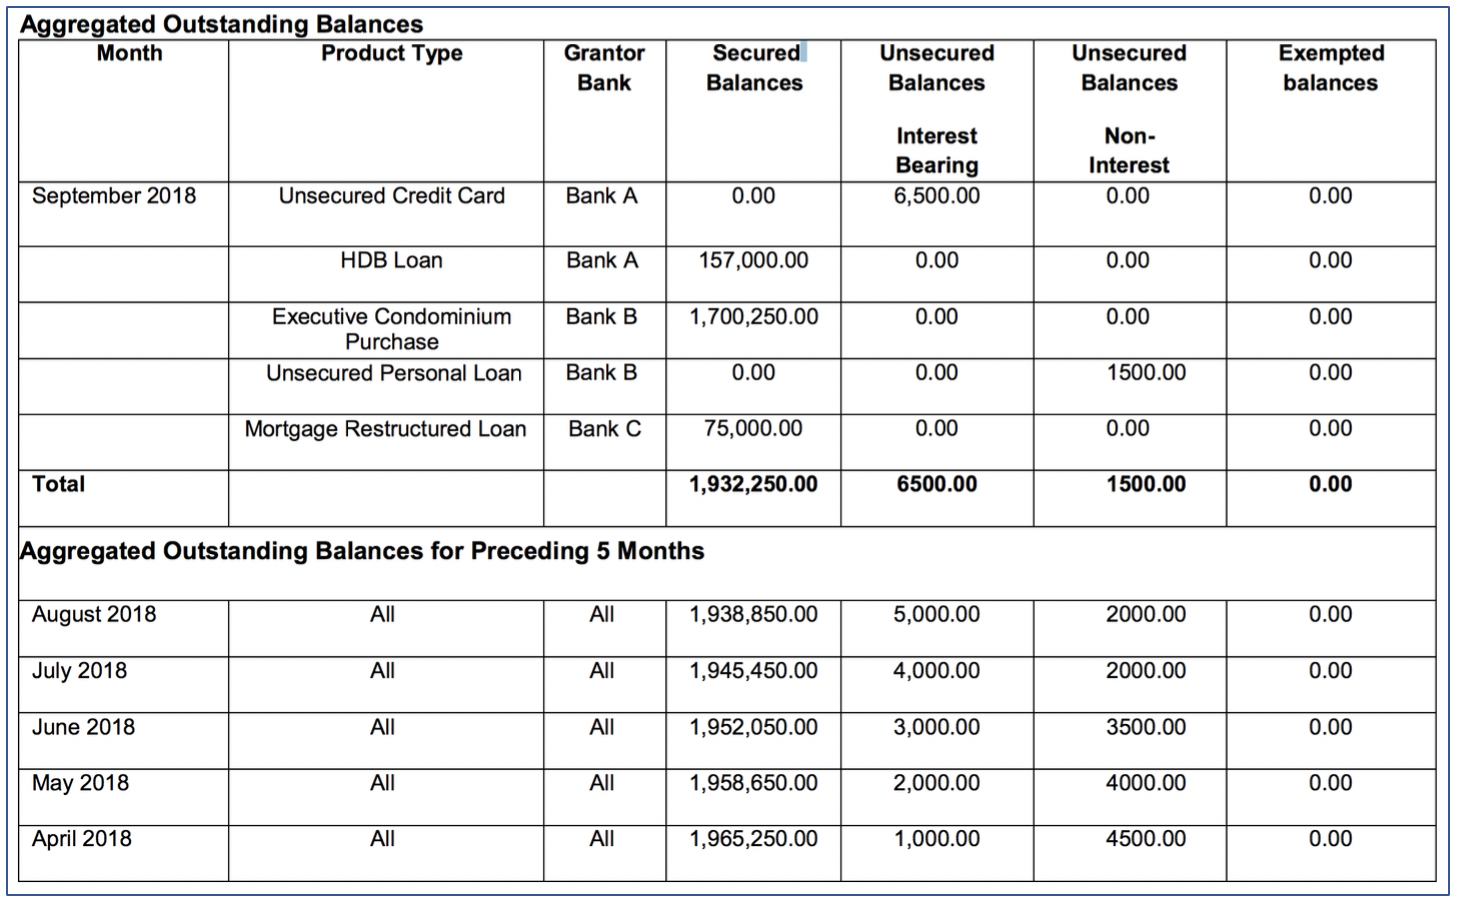 Aggregated outstanding balances